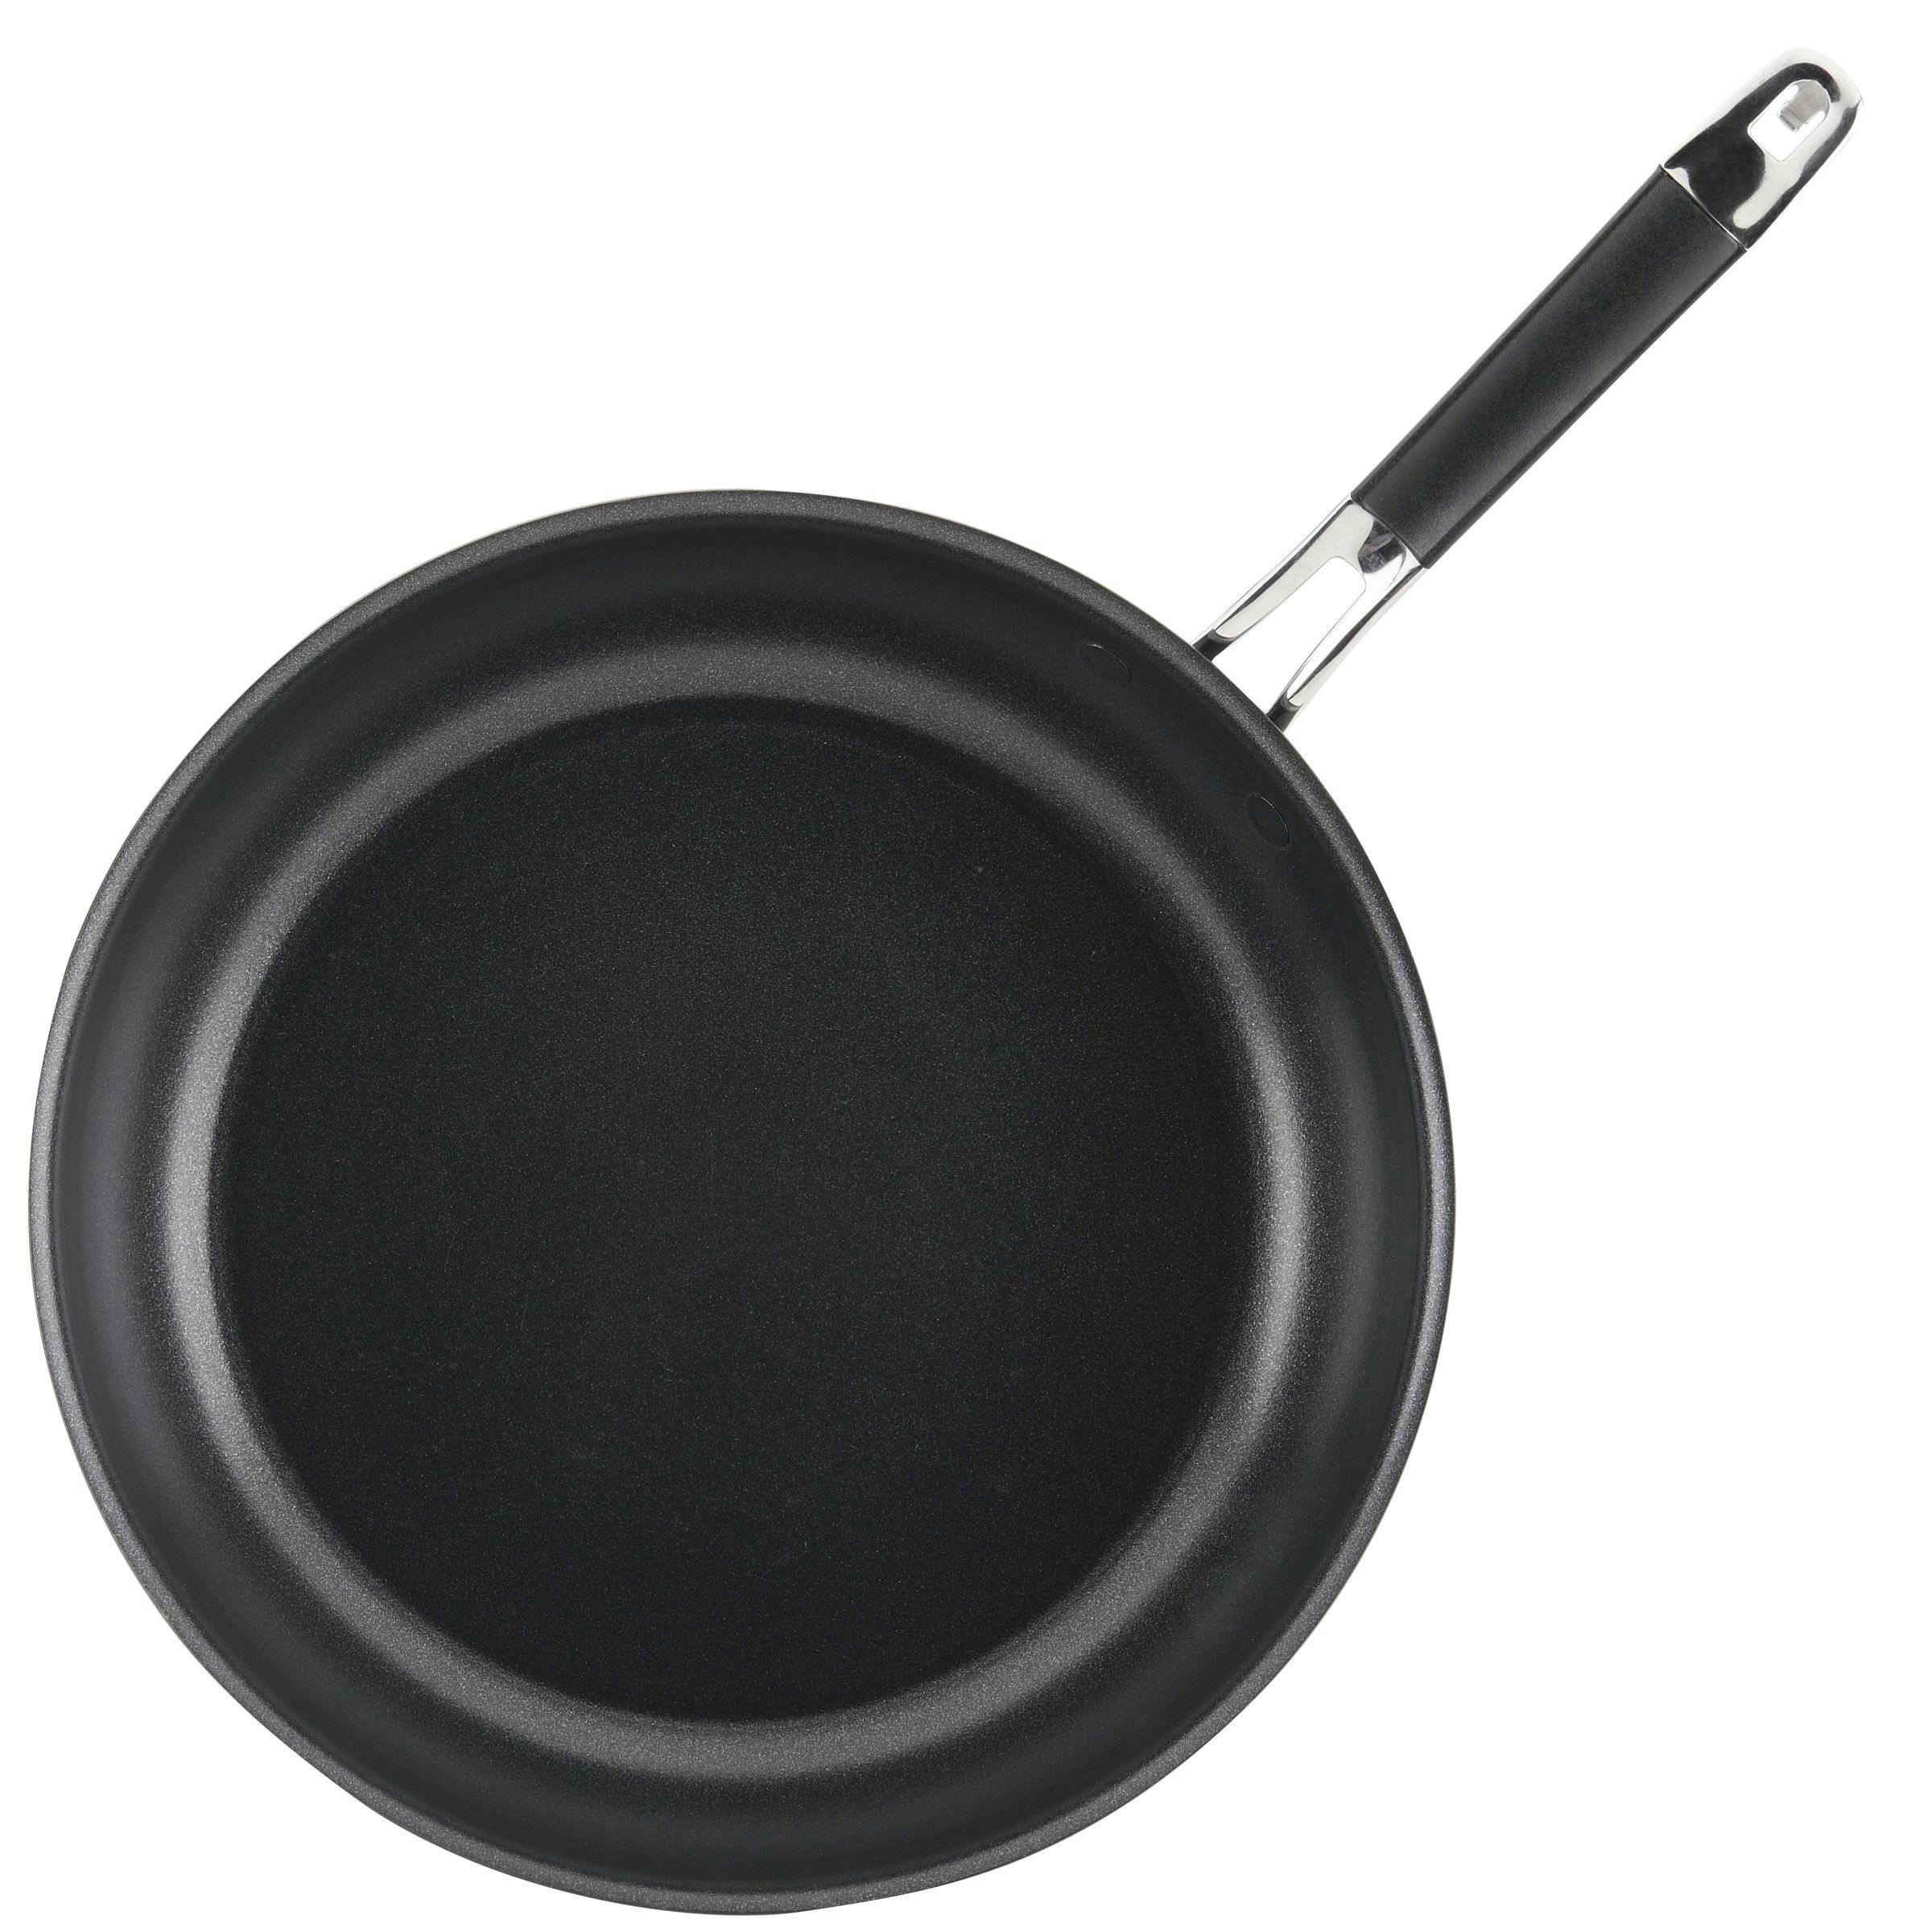 Anolon SmartStack Hard-Anodized Nonstick Induction Frying Pan, 12-inch, Black